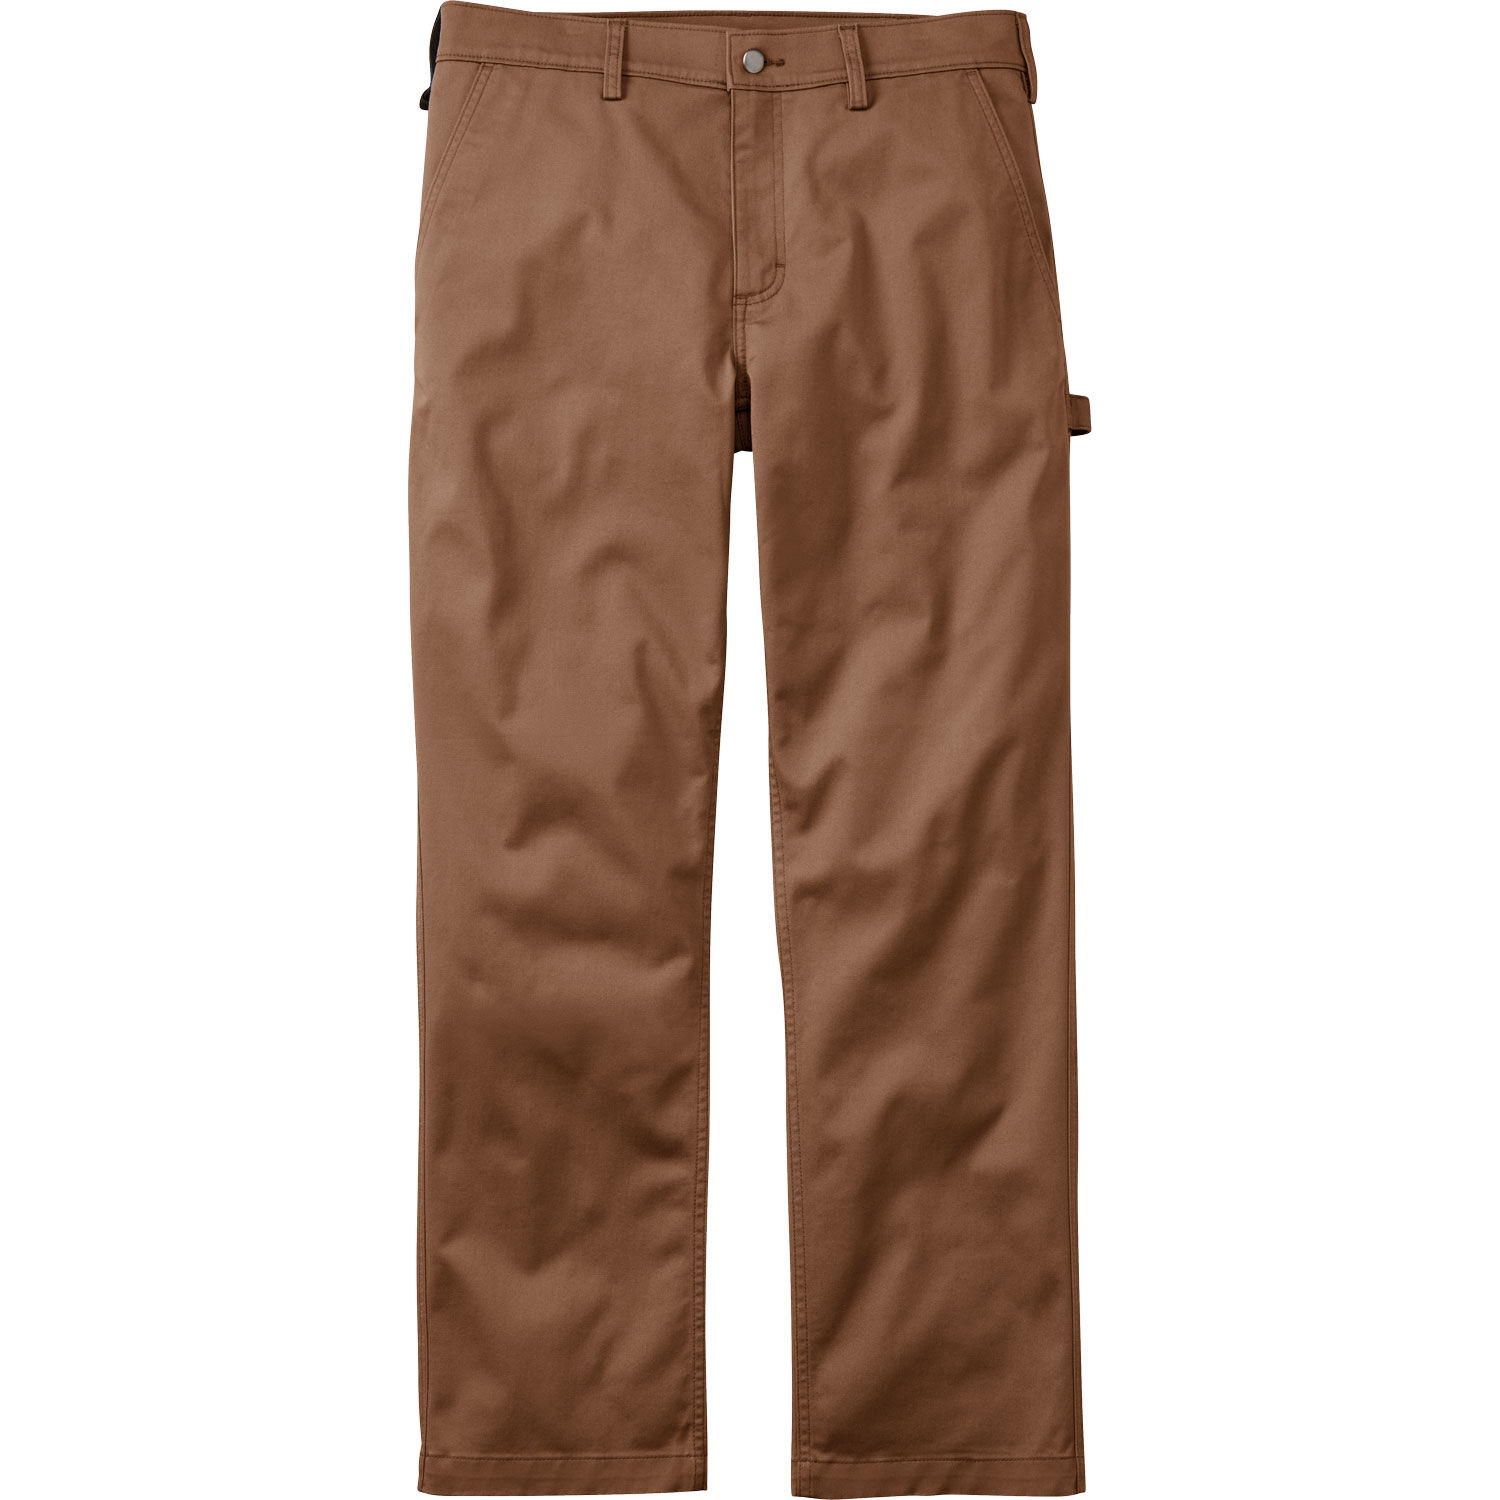 Carhartt 103160 Steel Double Front Ripstop Pant - Loose Fit | MI Supplies